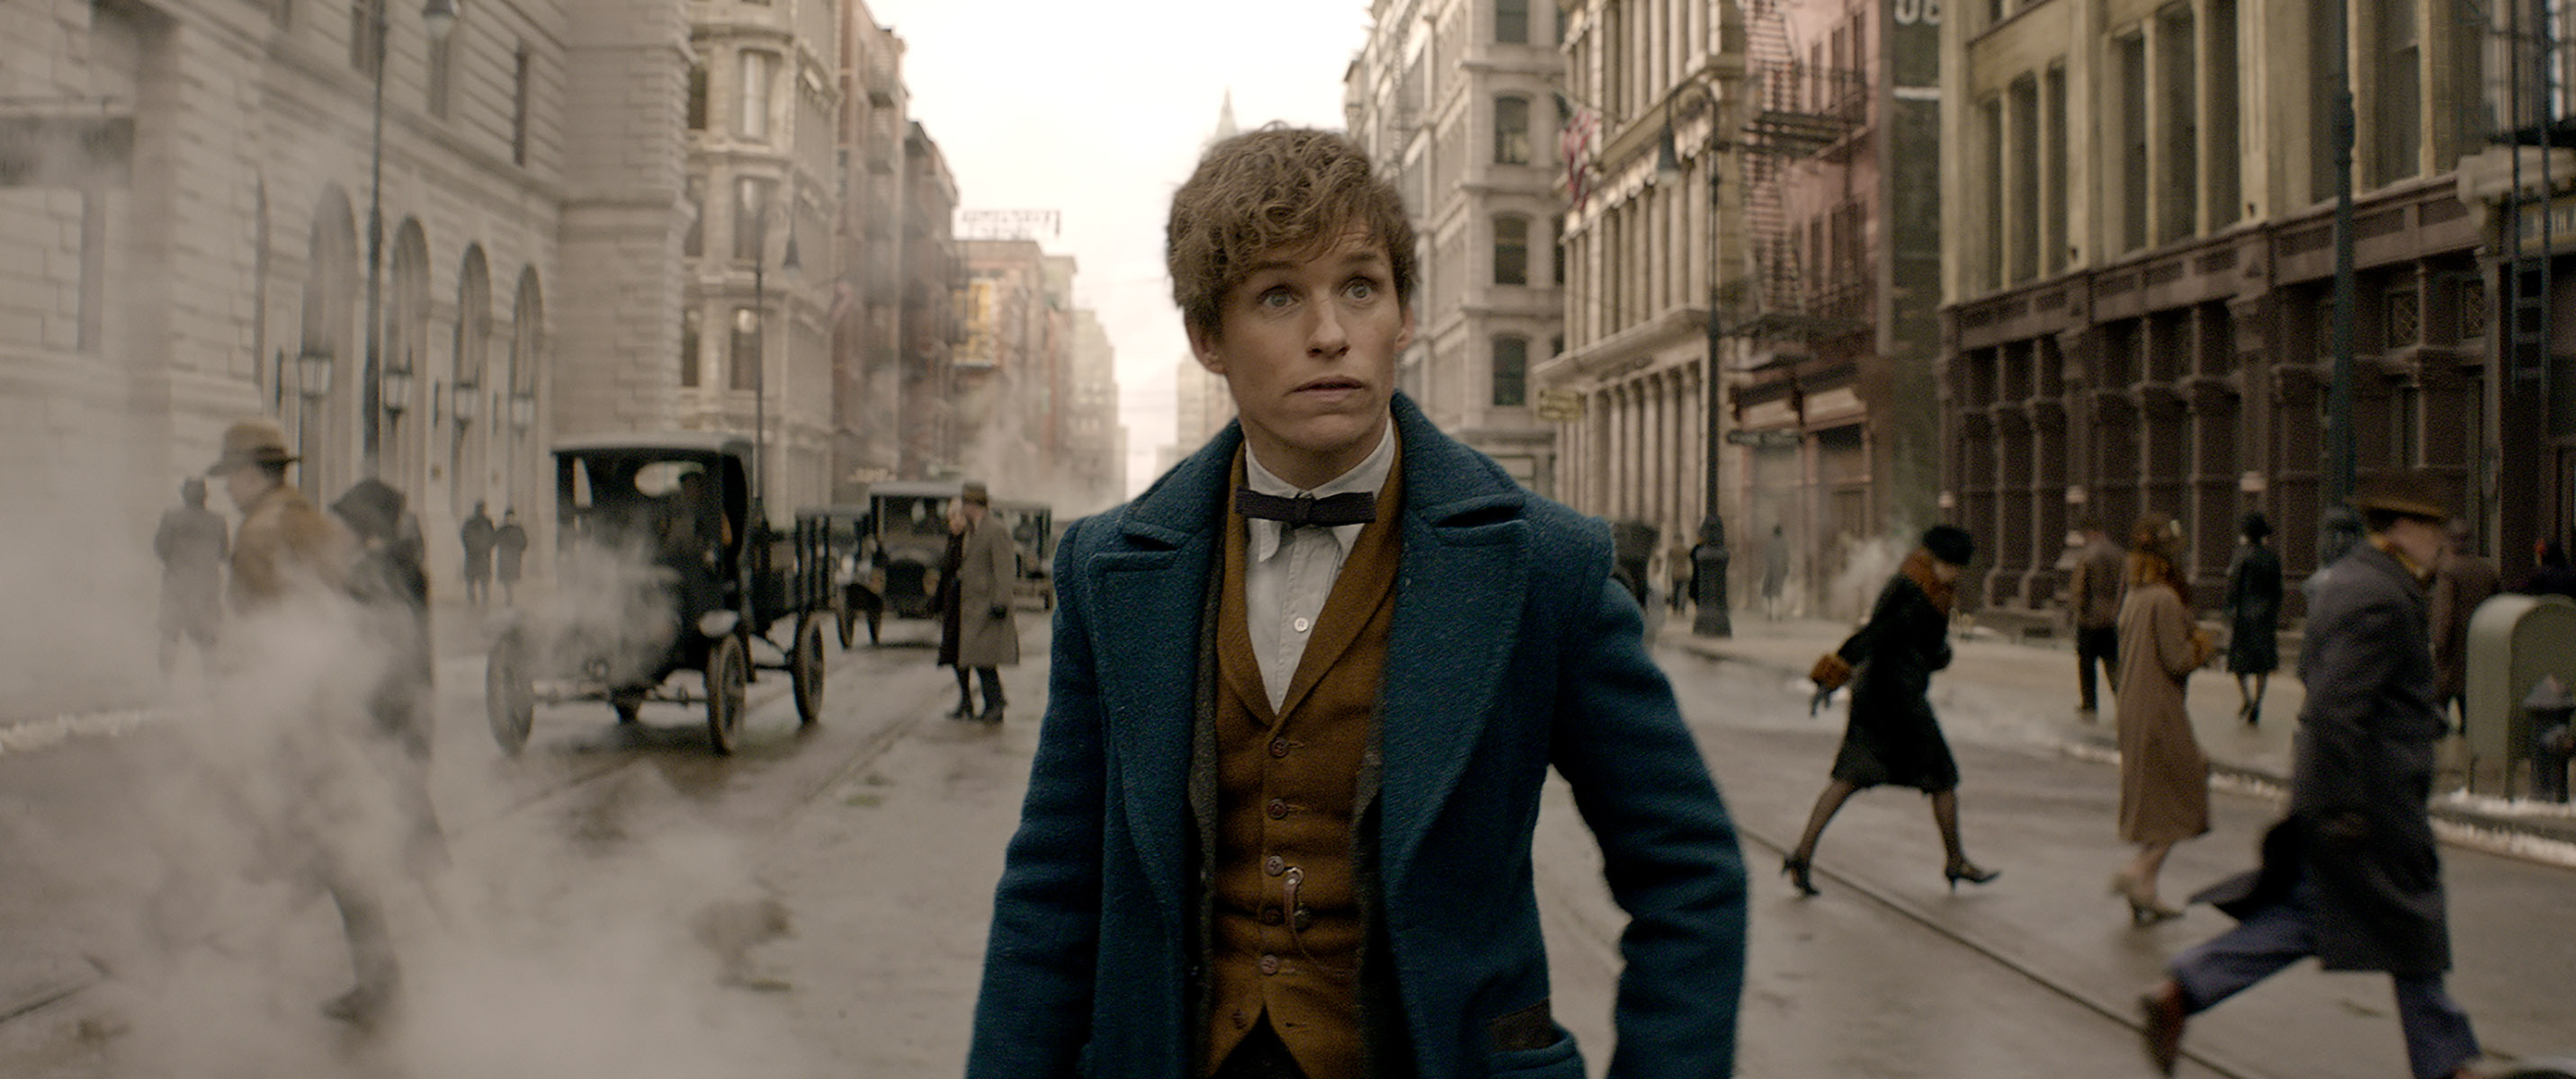 Fantastic Beasts And Where To Find Them Film Watch 2016 Online